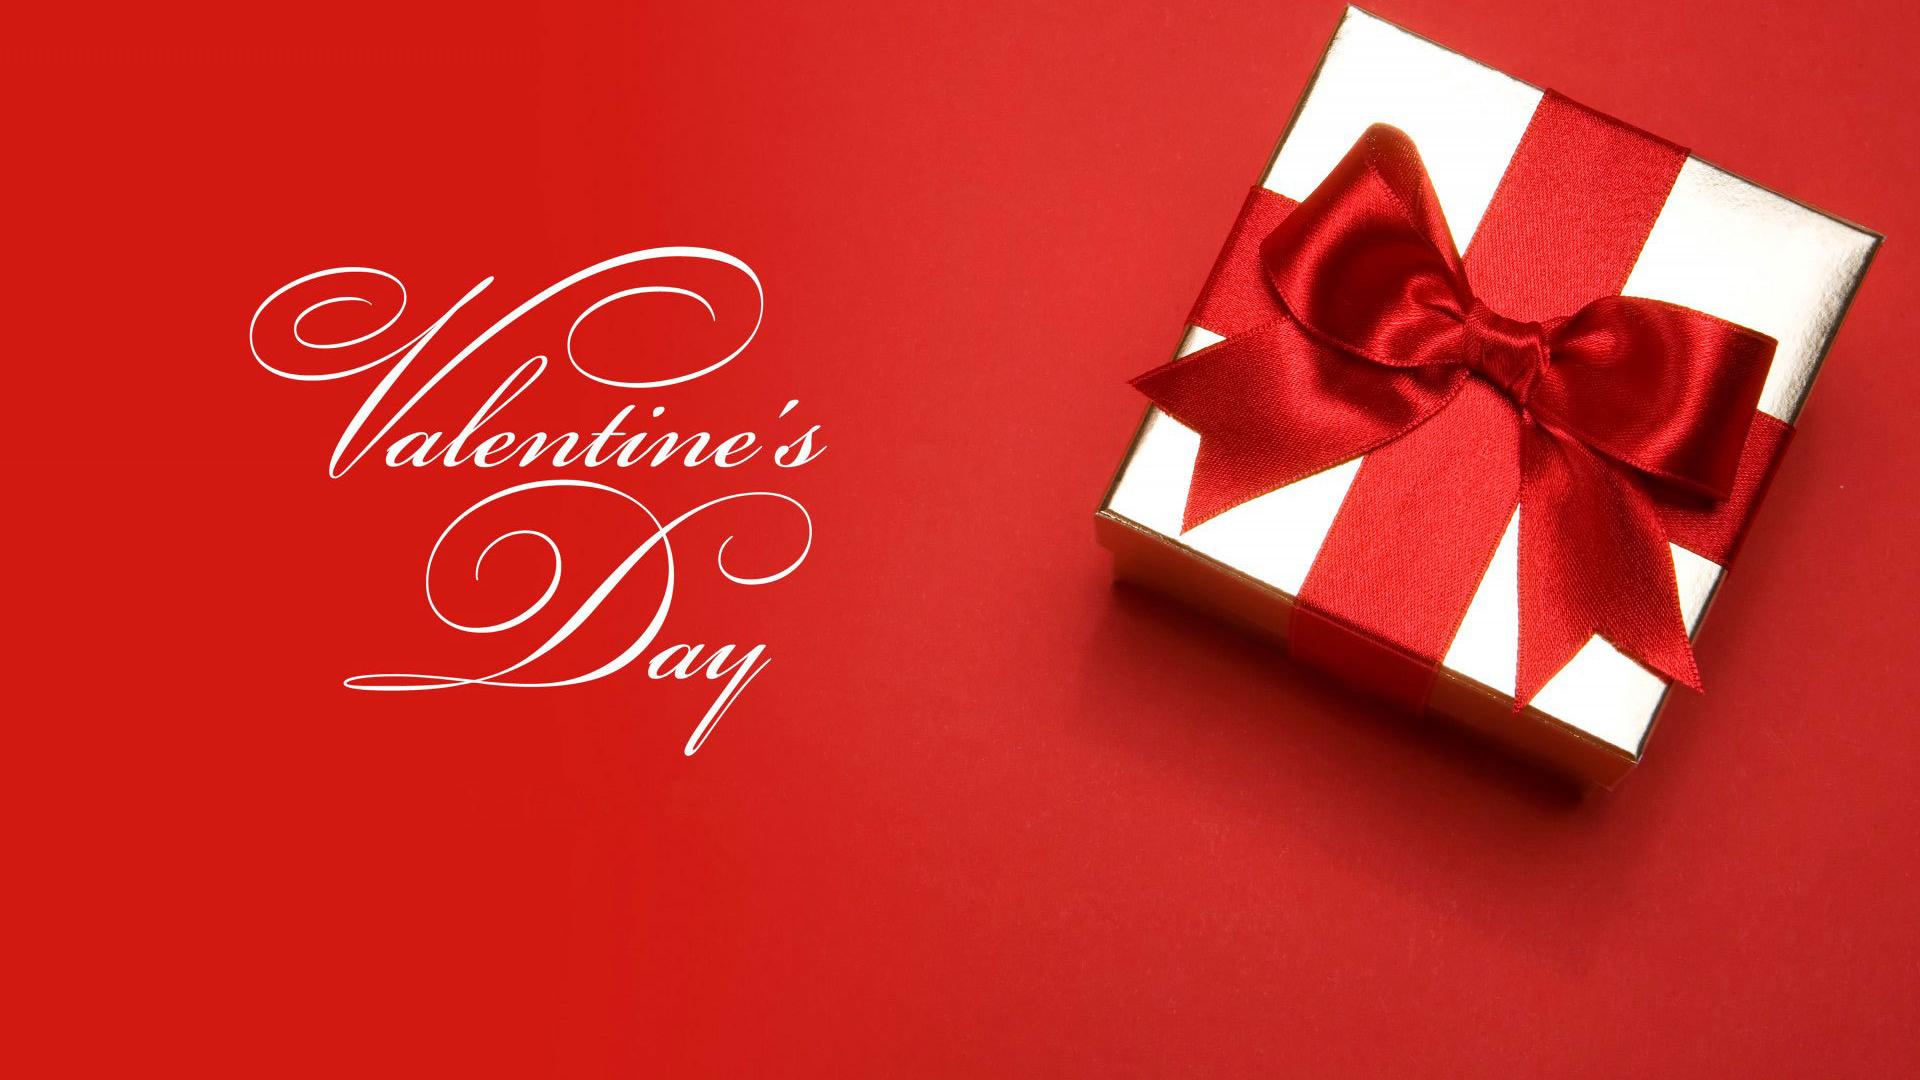 Red love wallpaper - magic gift for Valentines Day